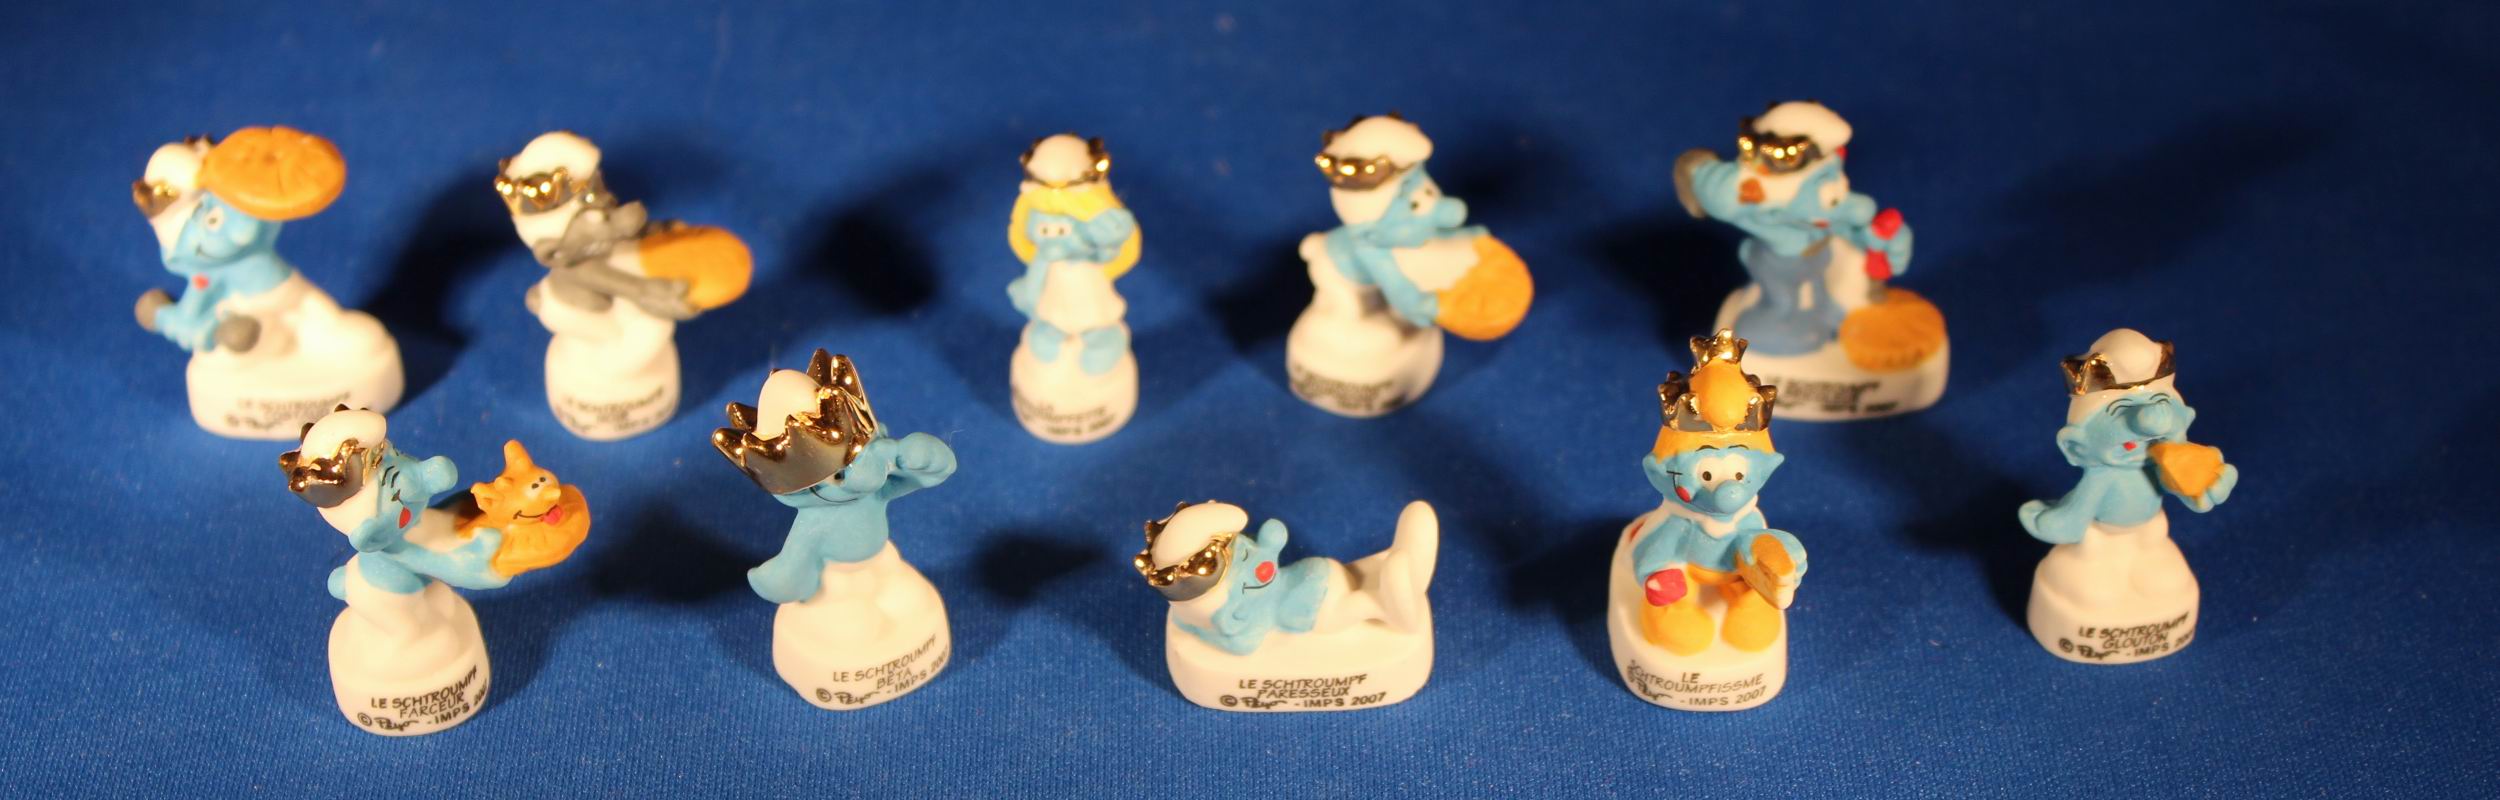 Smurfs Feves Collection - Ron & Aly